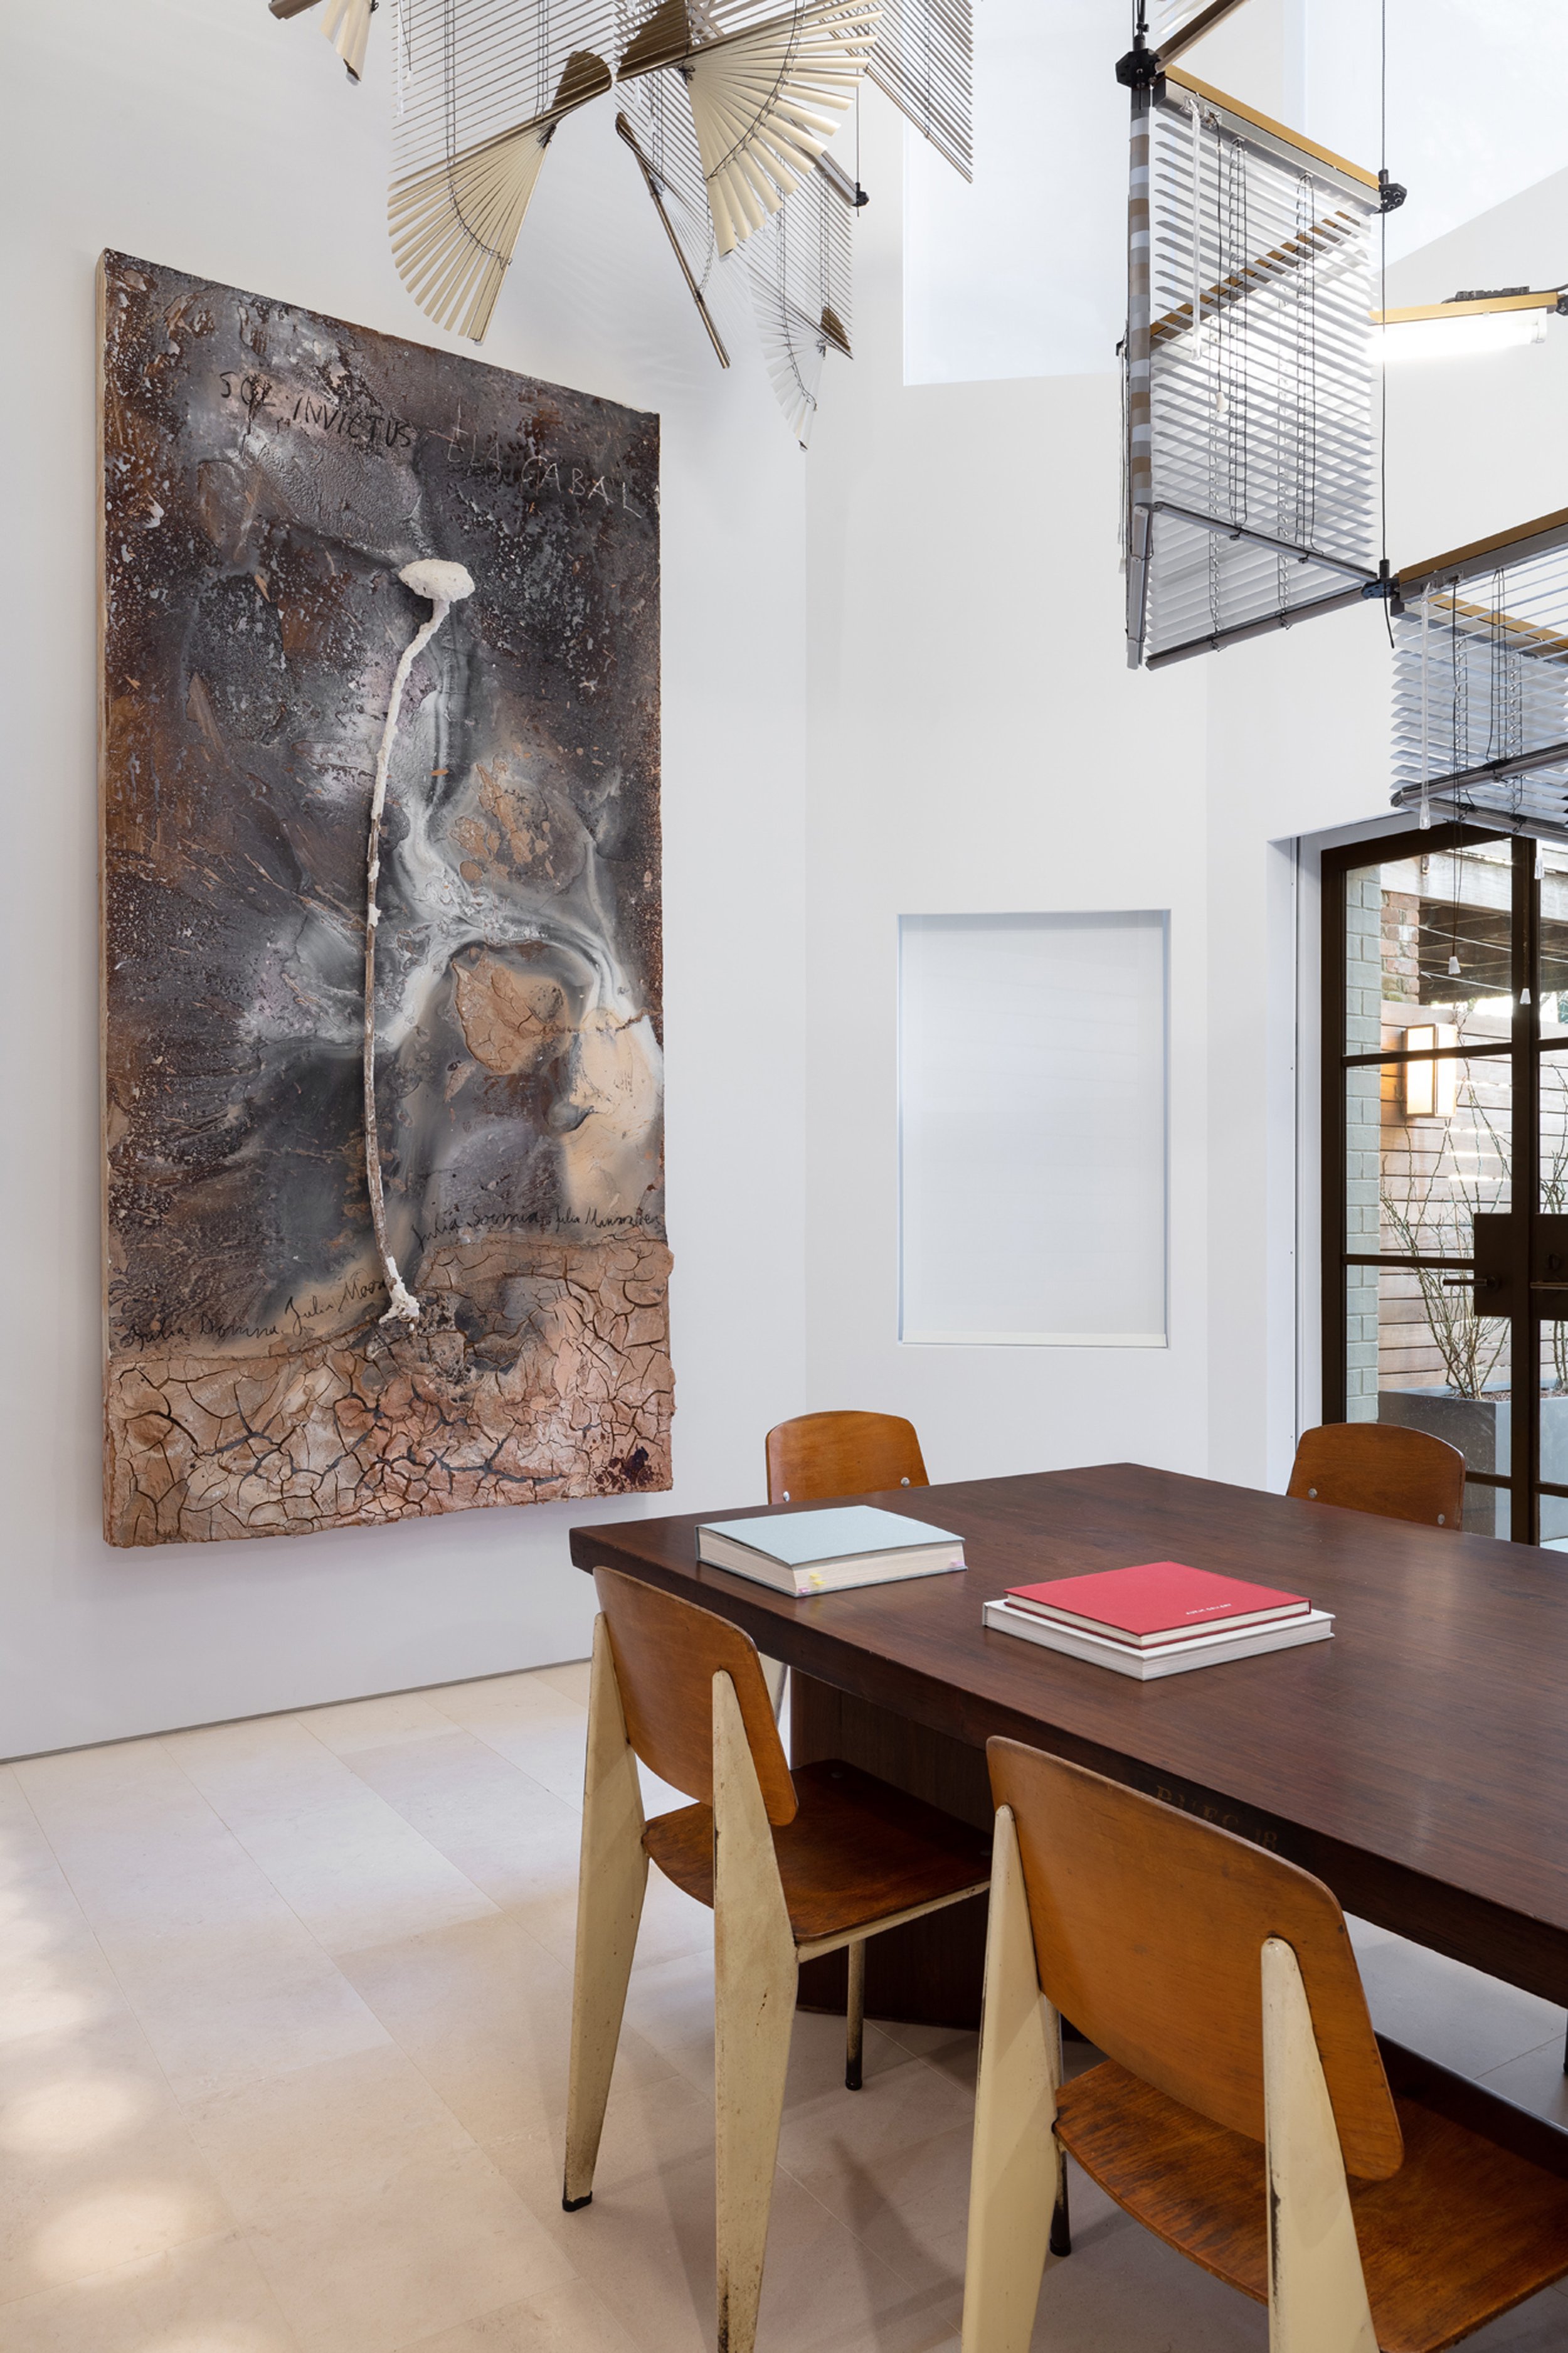  Charlap Hyman &amp; Herrero  Tina Kim Townhouse   Featured in Galerie Magazine December 2019 is Tina Kim’s townhouse. Beneath the Haegue Yang installation in the double-height formal dining area, an Anselm Kiefer work hangs near a Pierre Jeanneret t